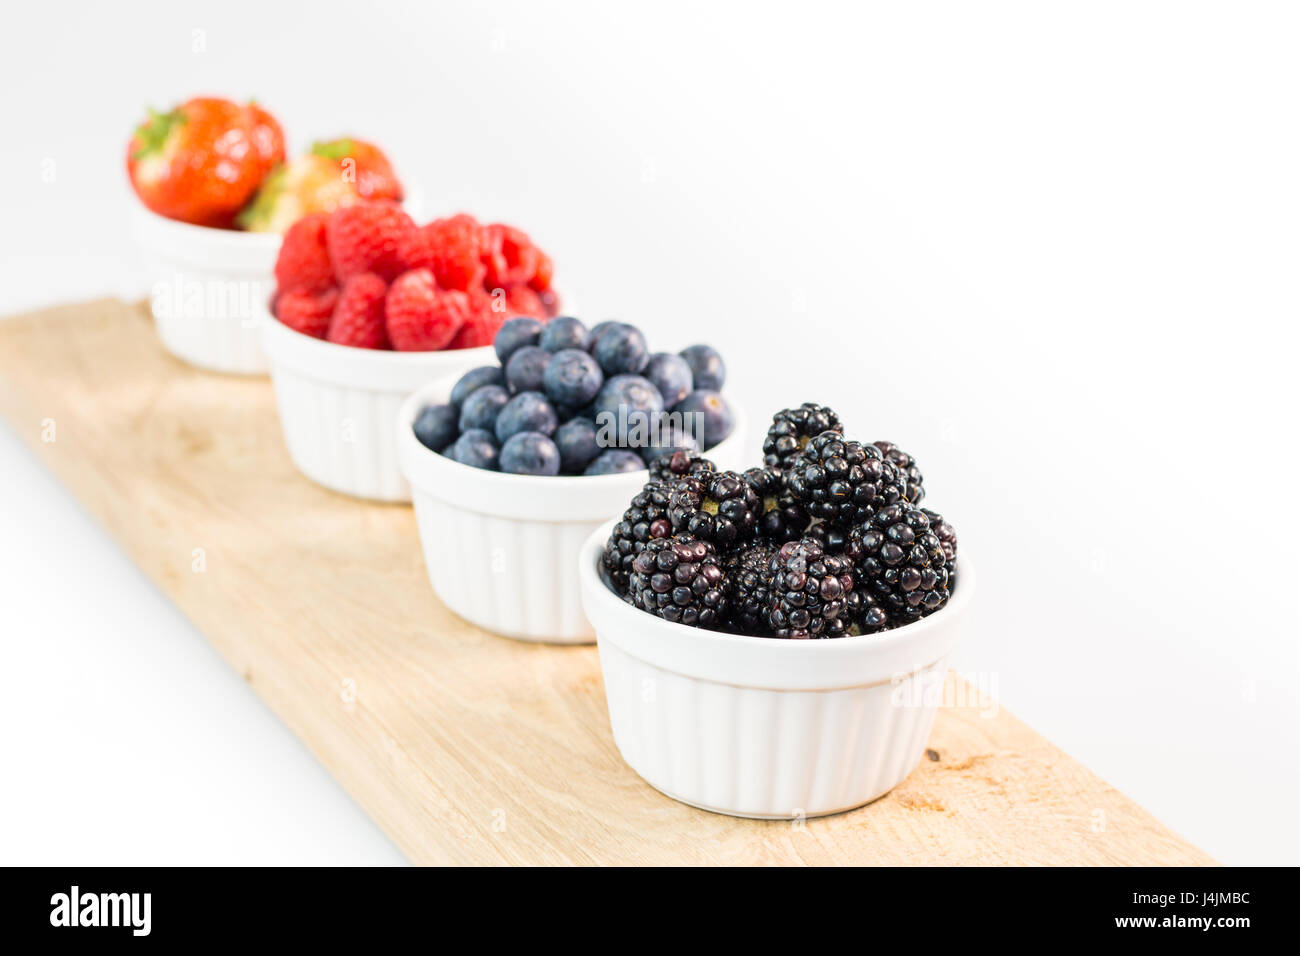 Blackberries, blueberries, raspberries and strawberries on wooden cutting board with shallow depth of field Stock Photo